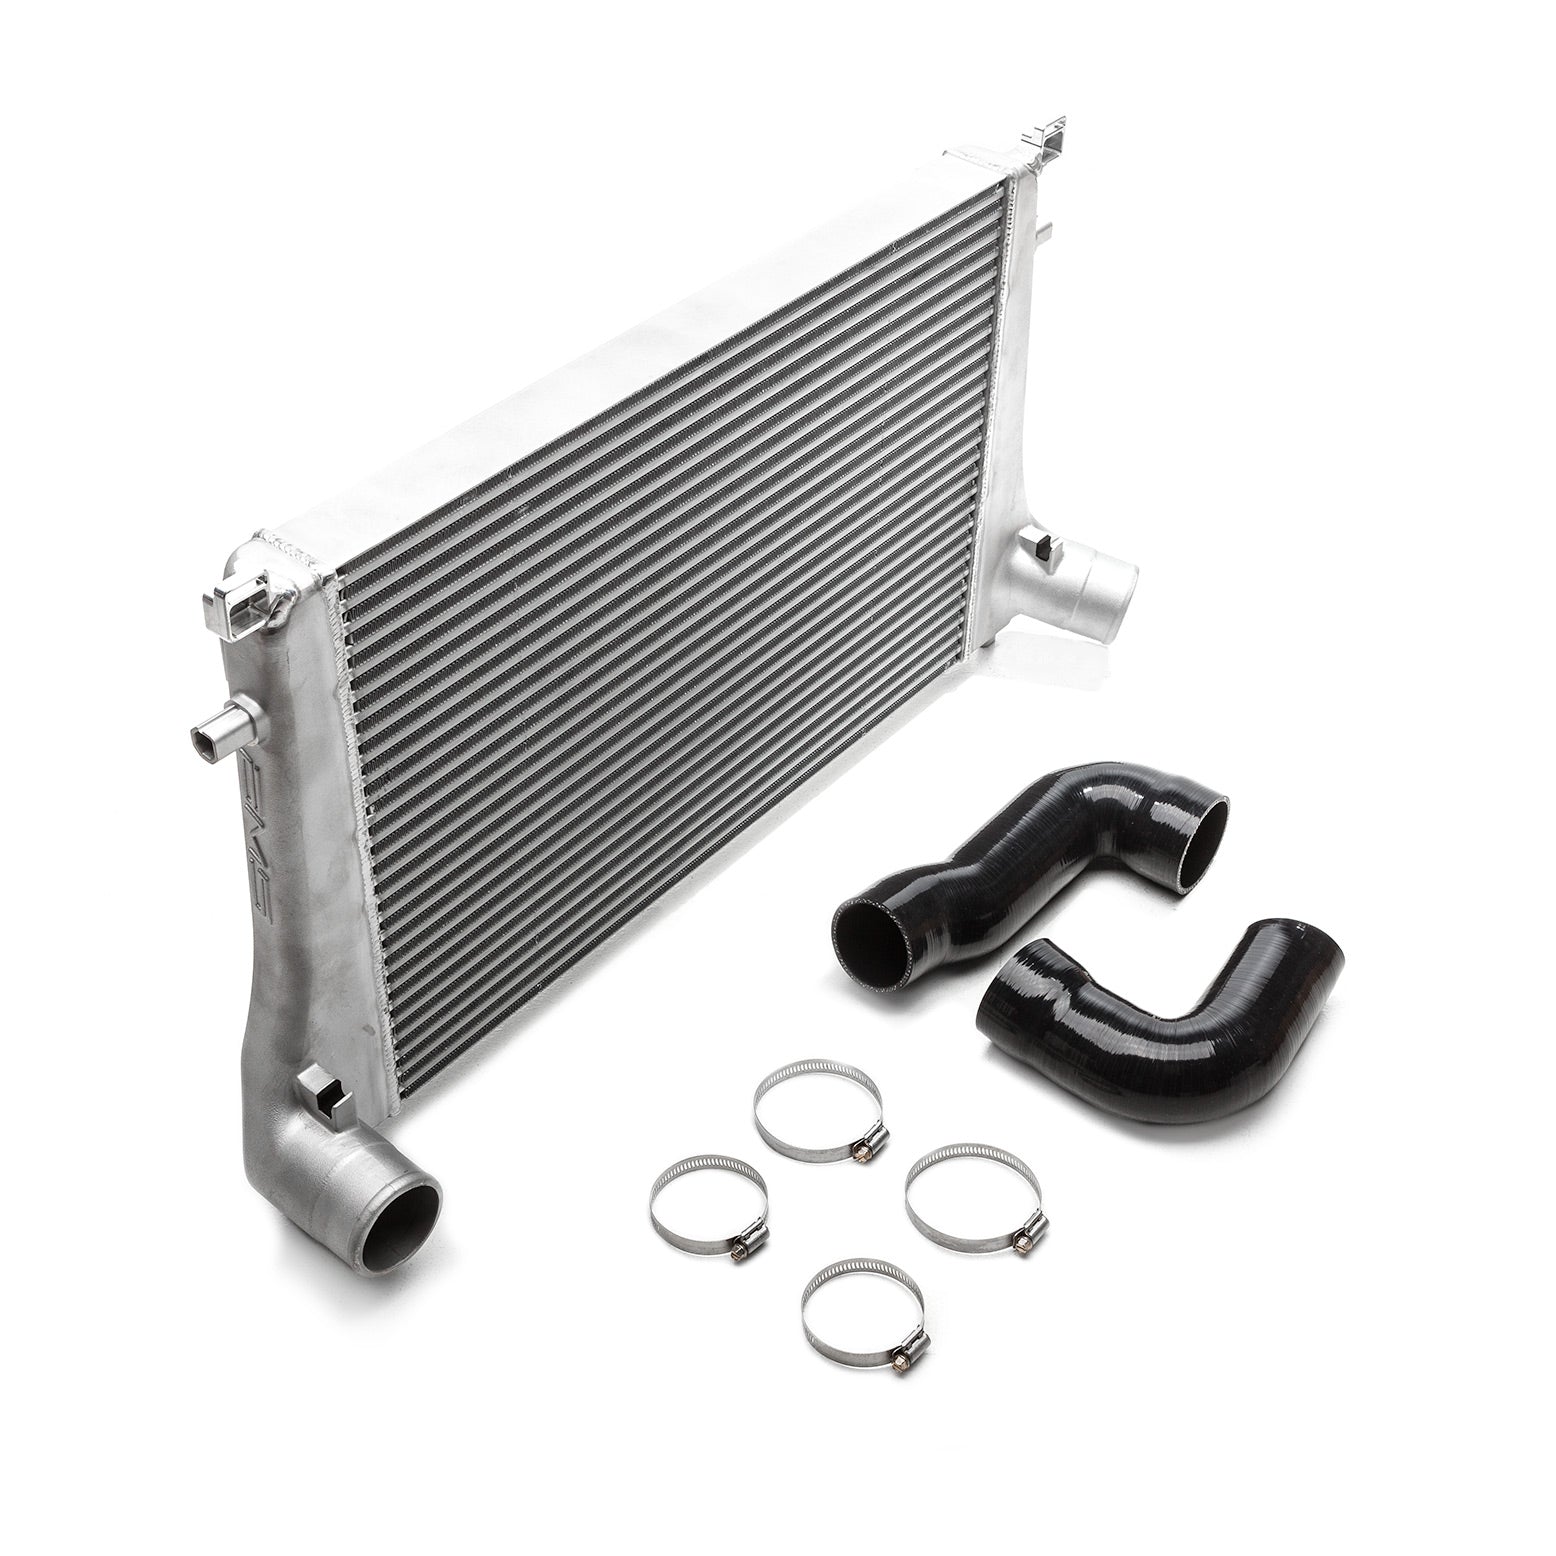 COBB VLK0020120-A AUDI Stage 2 Power Package A3 FWD/Quattro (8V) Photo-1 